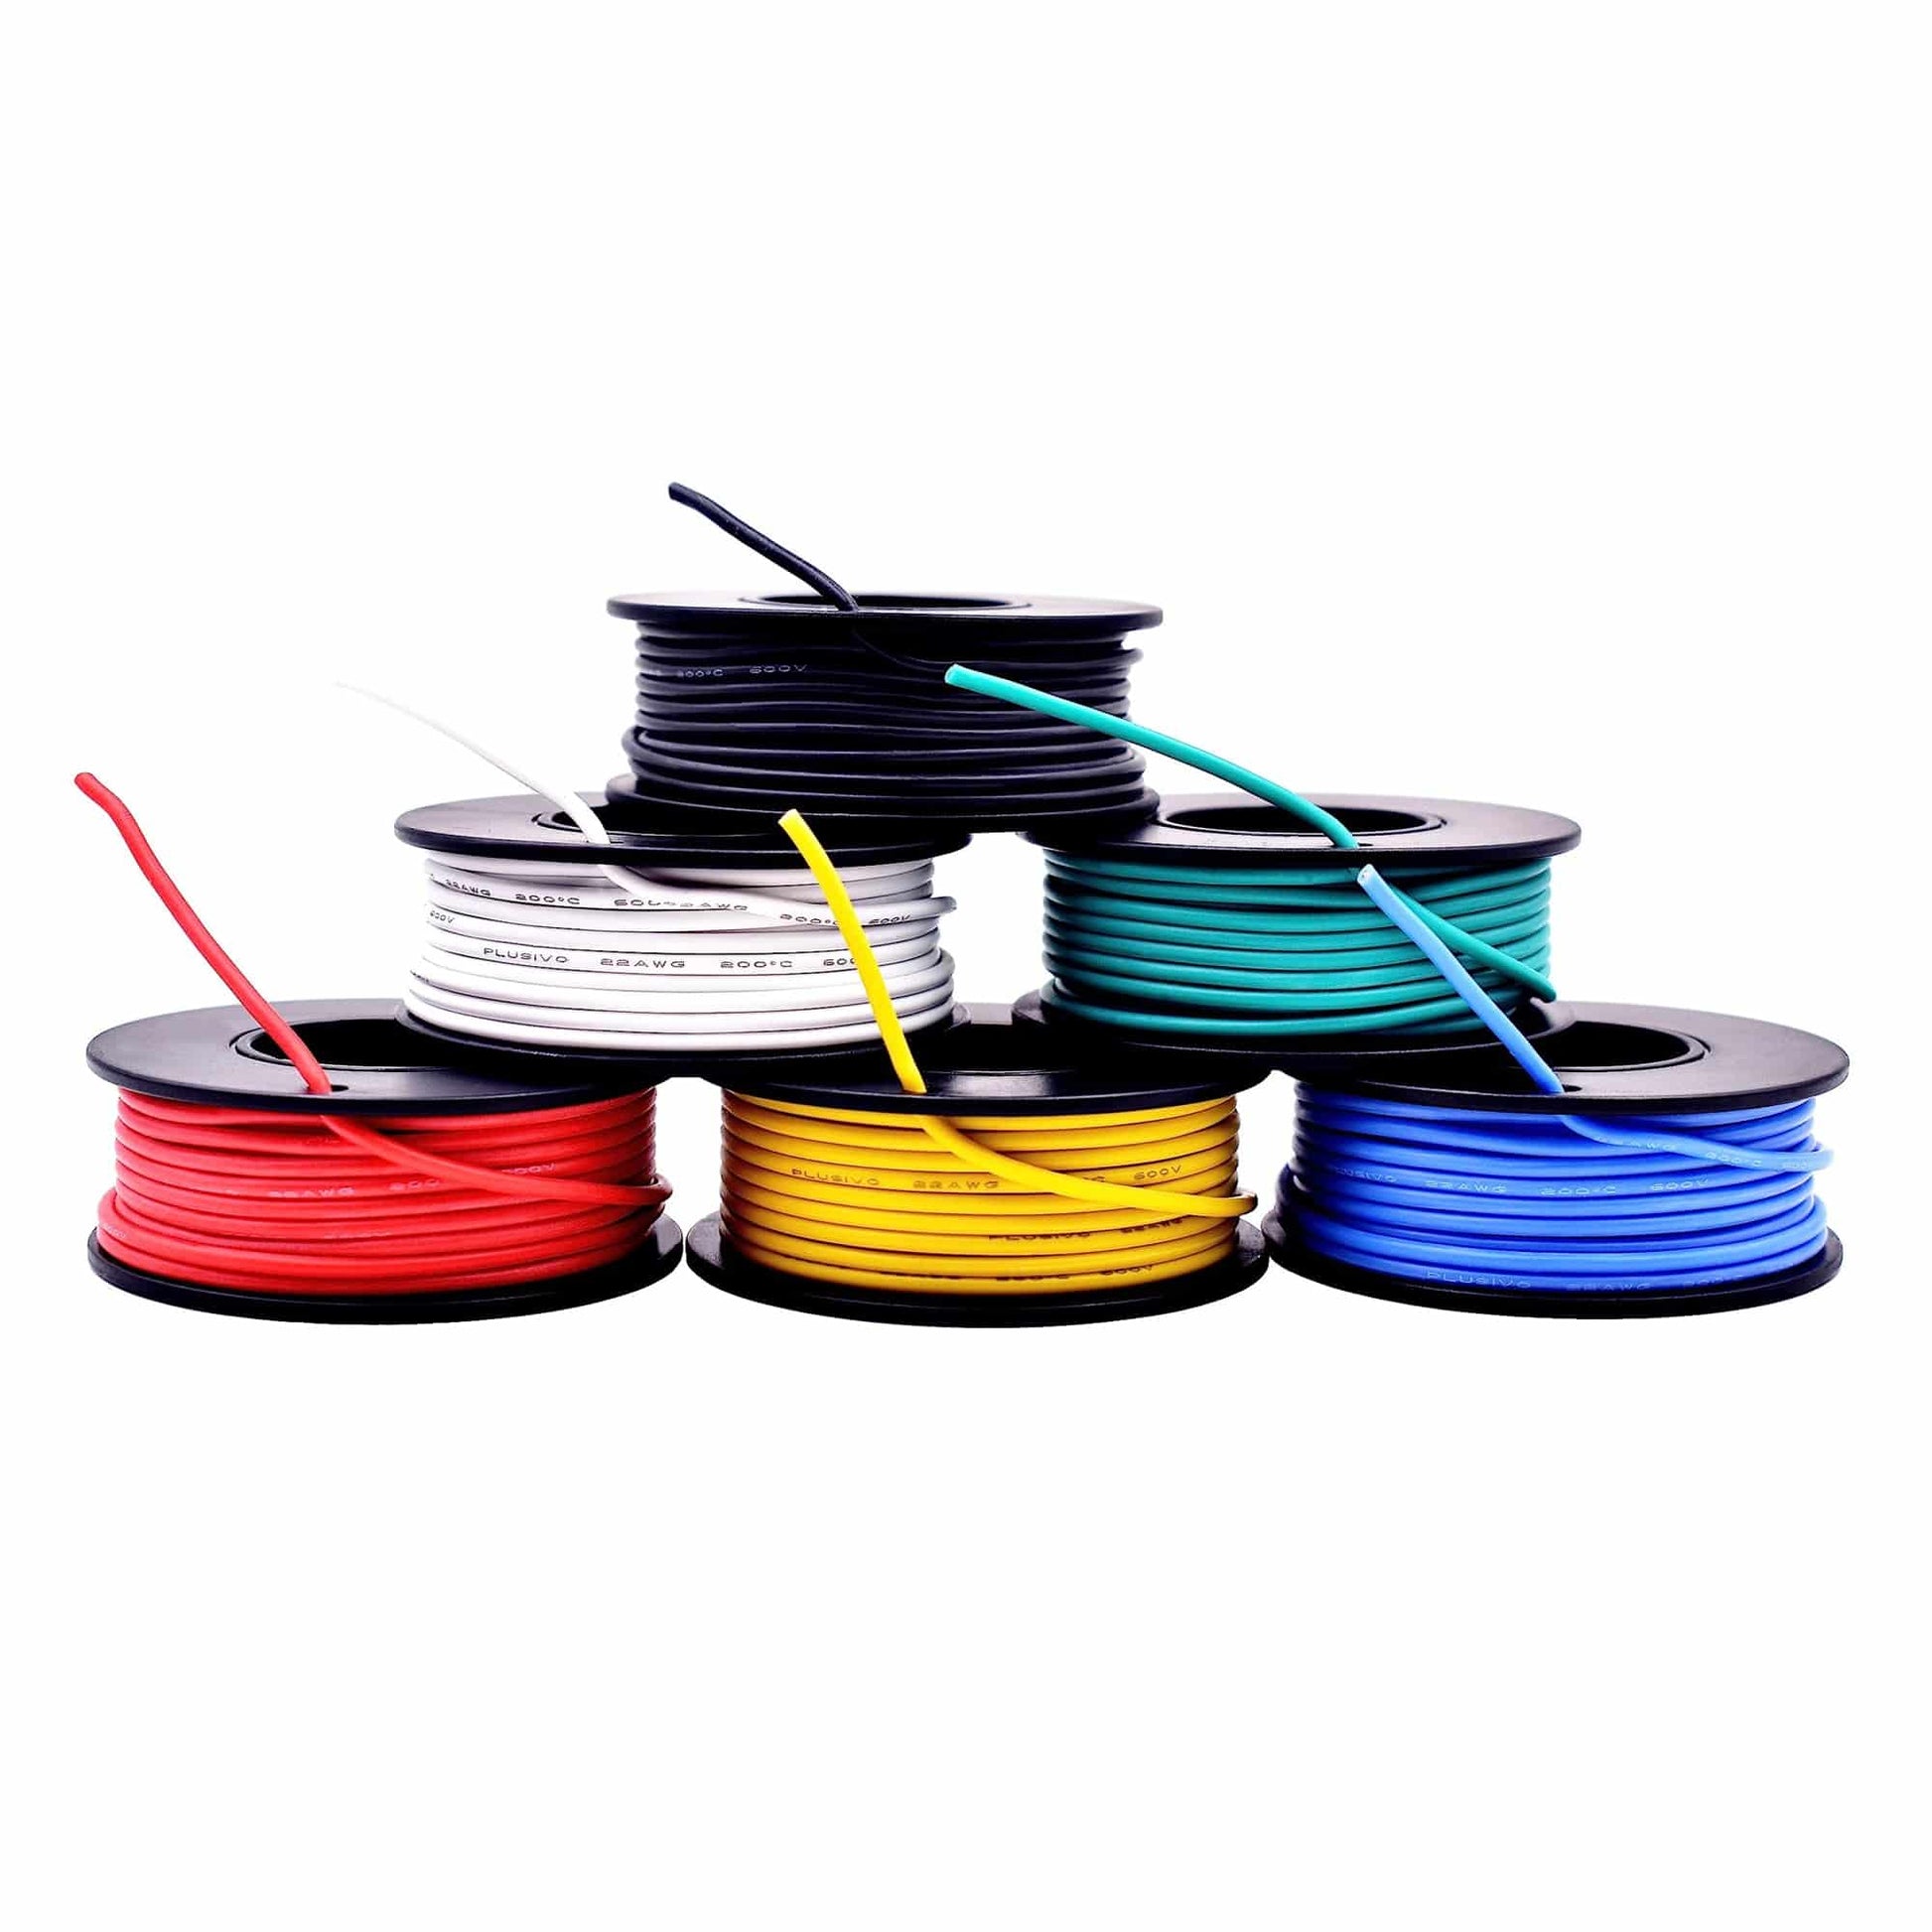 Plusivo Hook Up Wire Kit Plusivo 24AWG – 600V 6 Colors x 9M